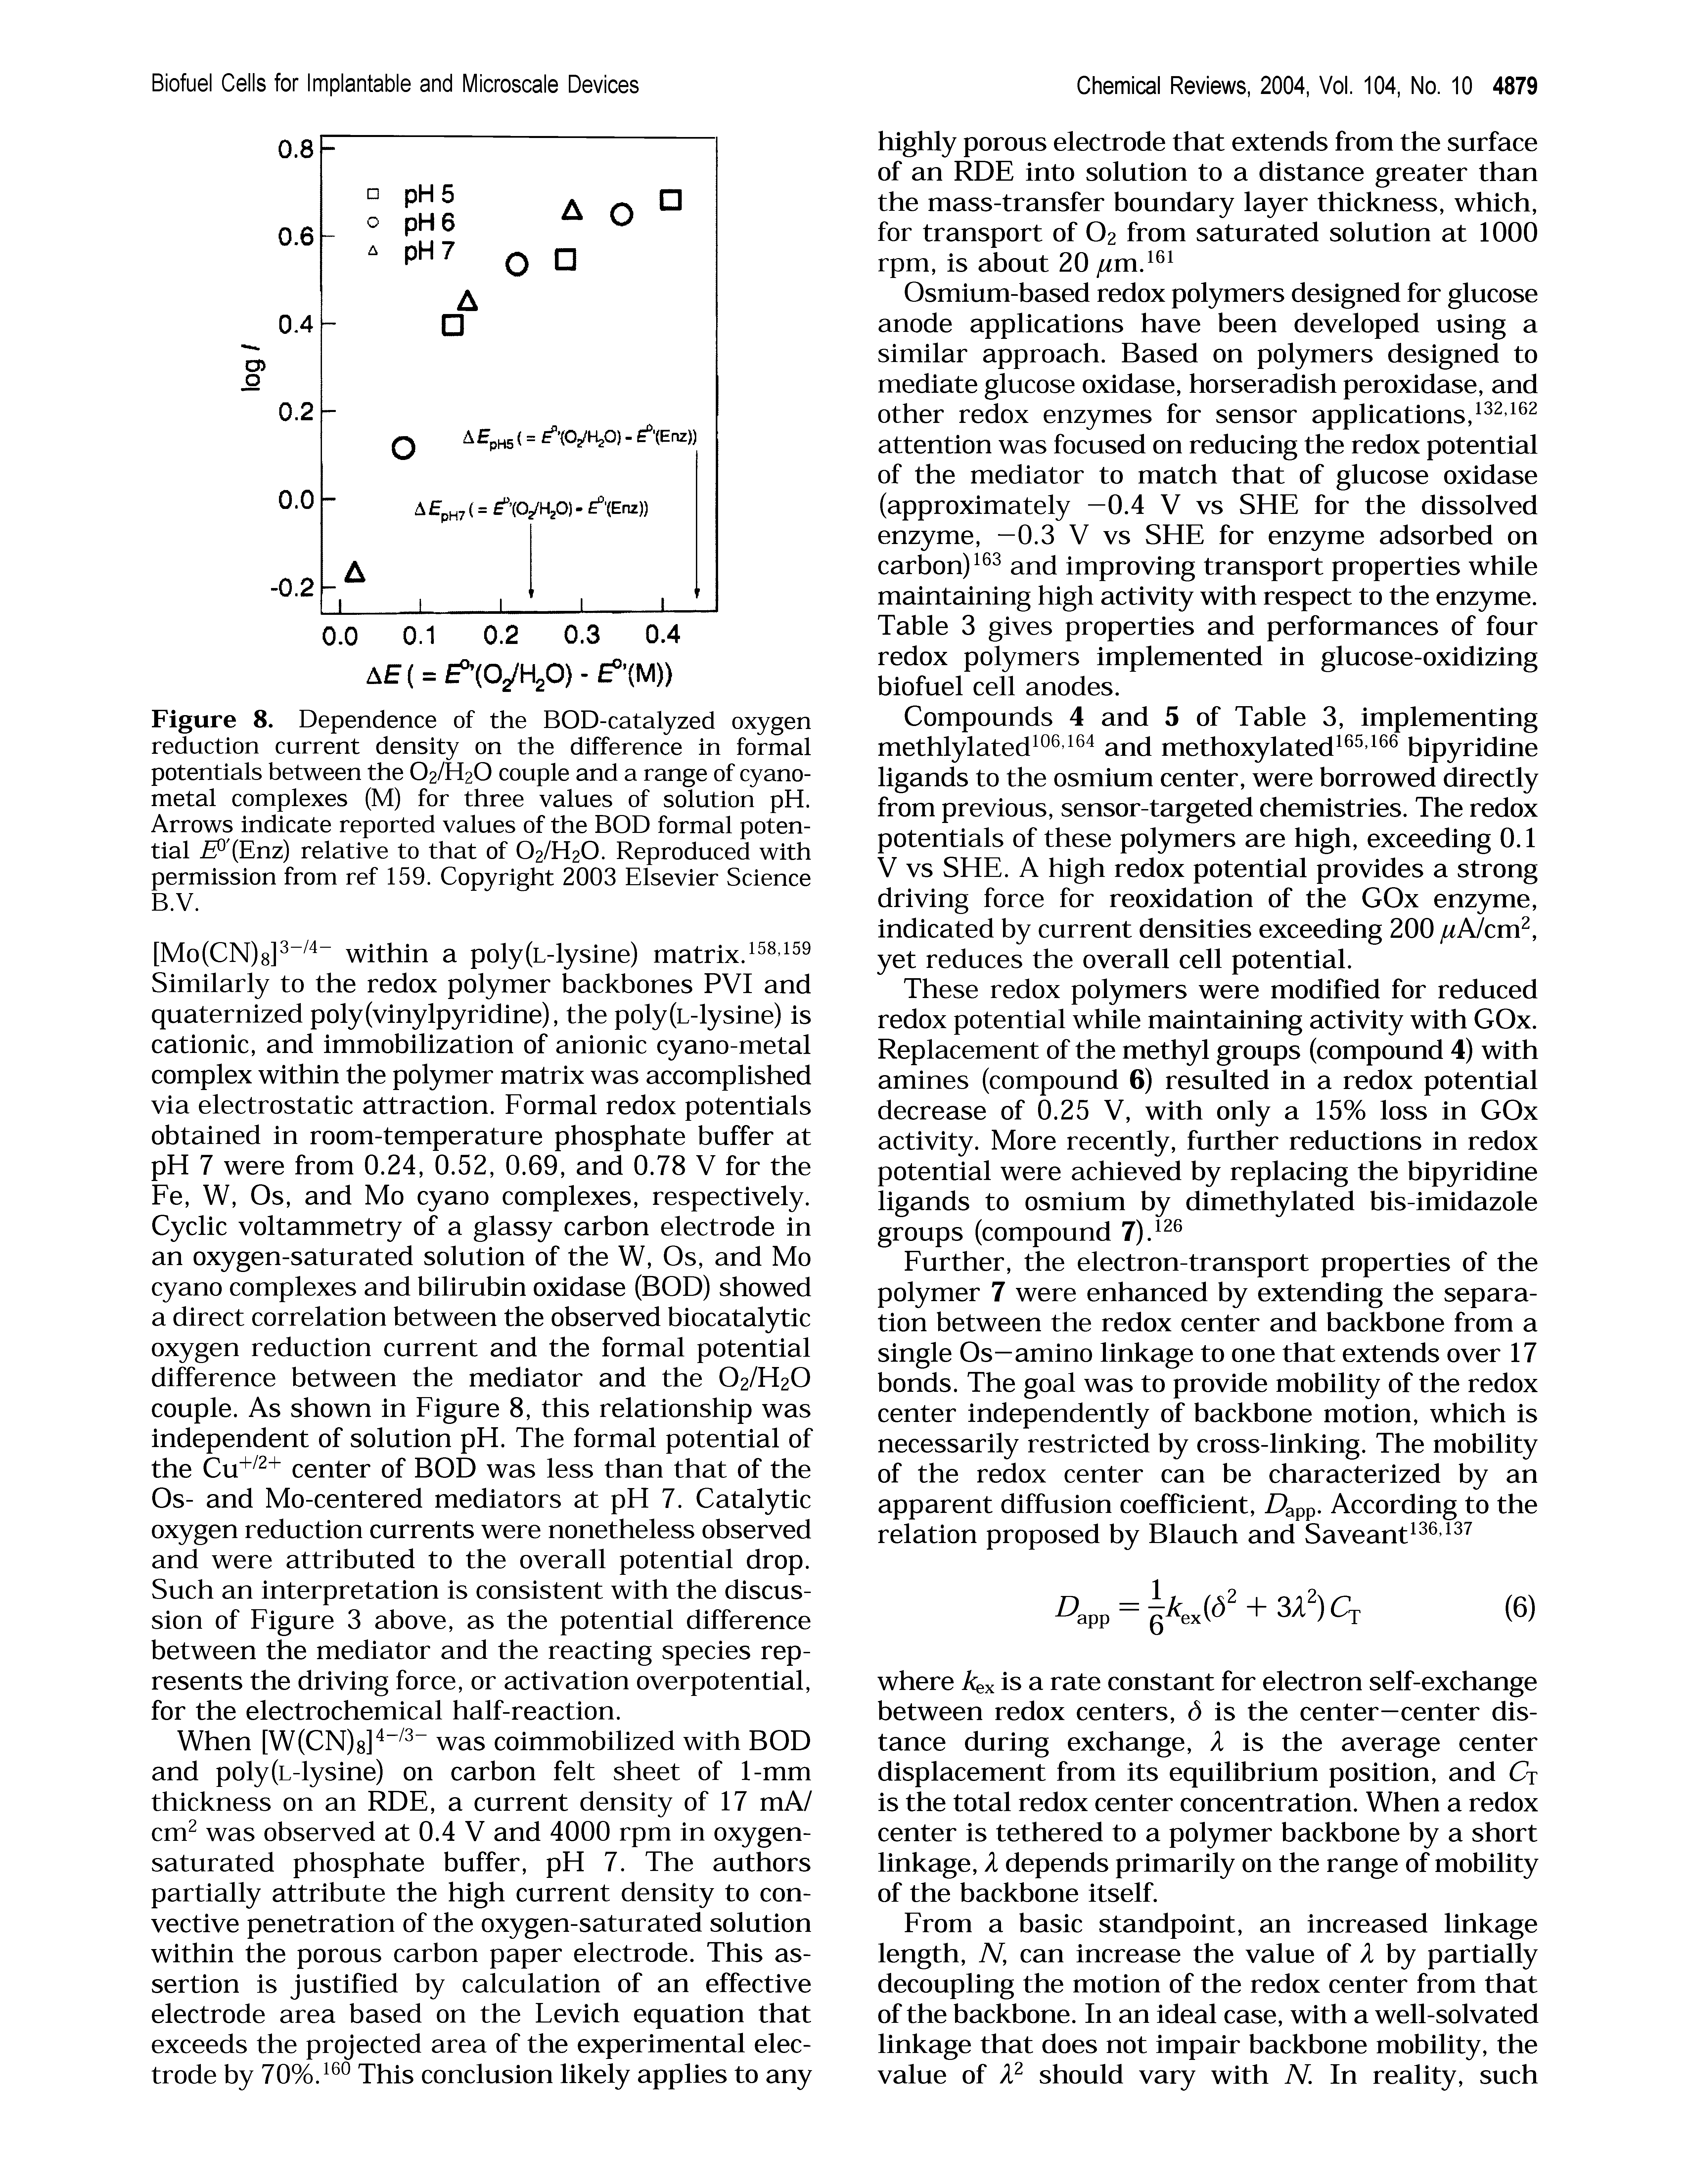 Figure 8. Dependence of the BOD-catalyzed oxygen reduction current density on the difference in formal potentials between the O2/H2O couple and a range of cyano-metal complexes (M) for three values of solution pH. Arrows indicate reported values of the BOD formal potential F (Enz) relative to that of O2/H2O. Reproduced with permission from ref 159. Copyright 2003 Elsevier Science B.V.